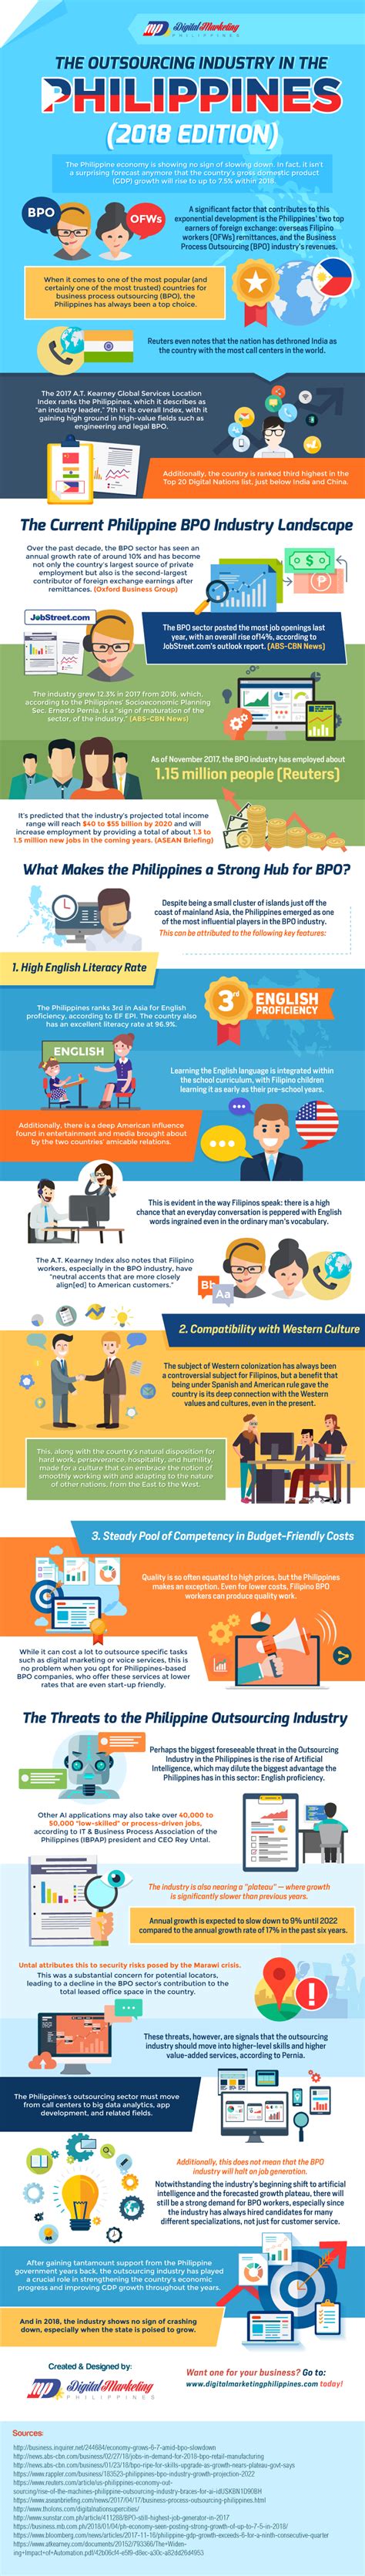 the outsourcing industry in the philippines edition infographic my xxx hot girl